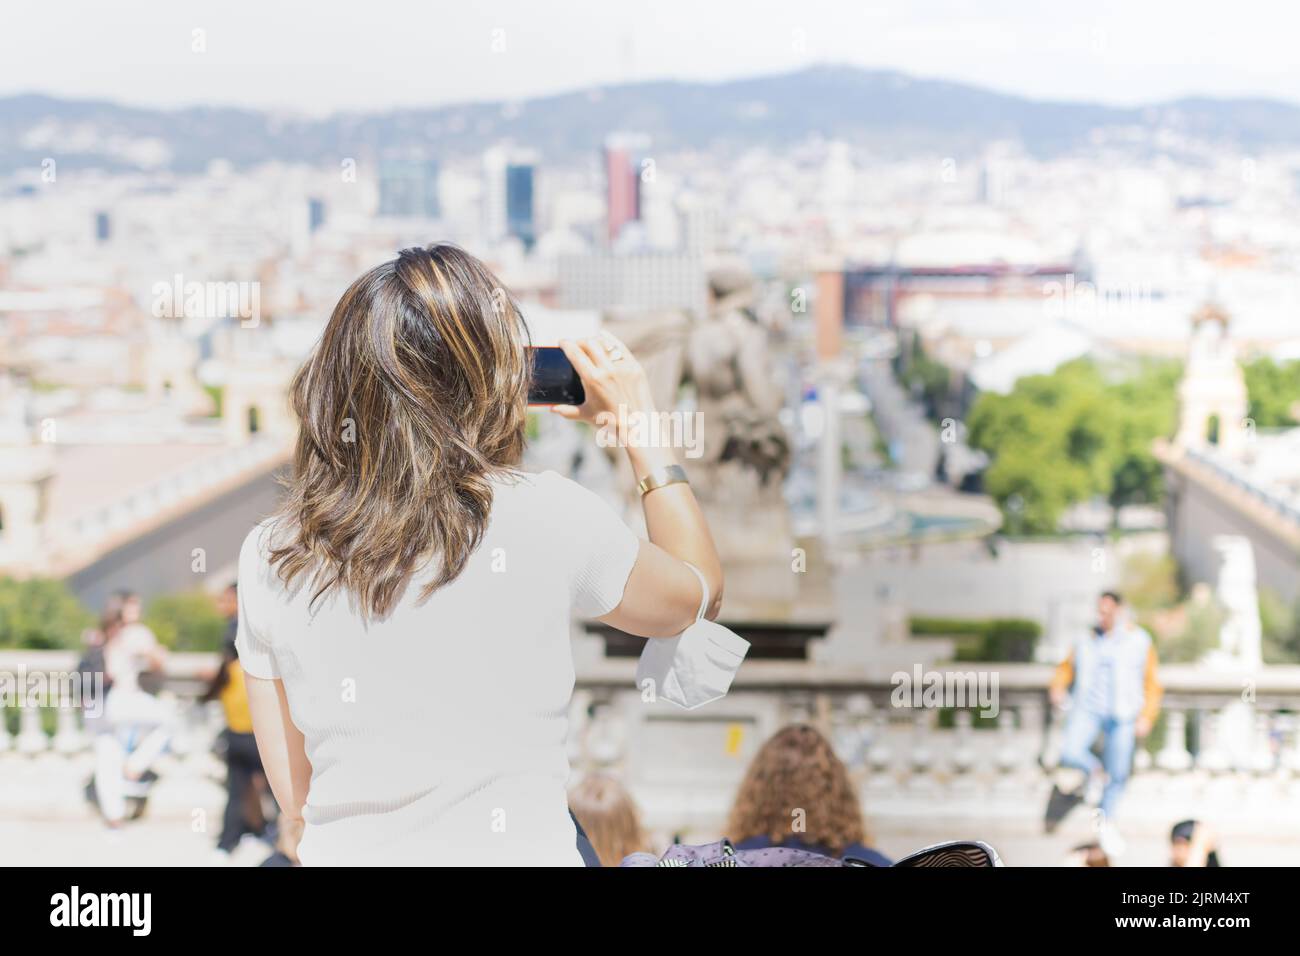 Barcelona, Spain - May 6, 2022: woman on her back taking a picture with her cell phone at the Montjuic viewpoint, Barcelona (Spain). Stock Photo